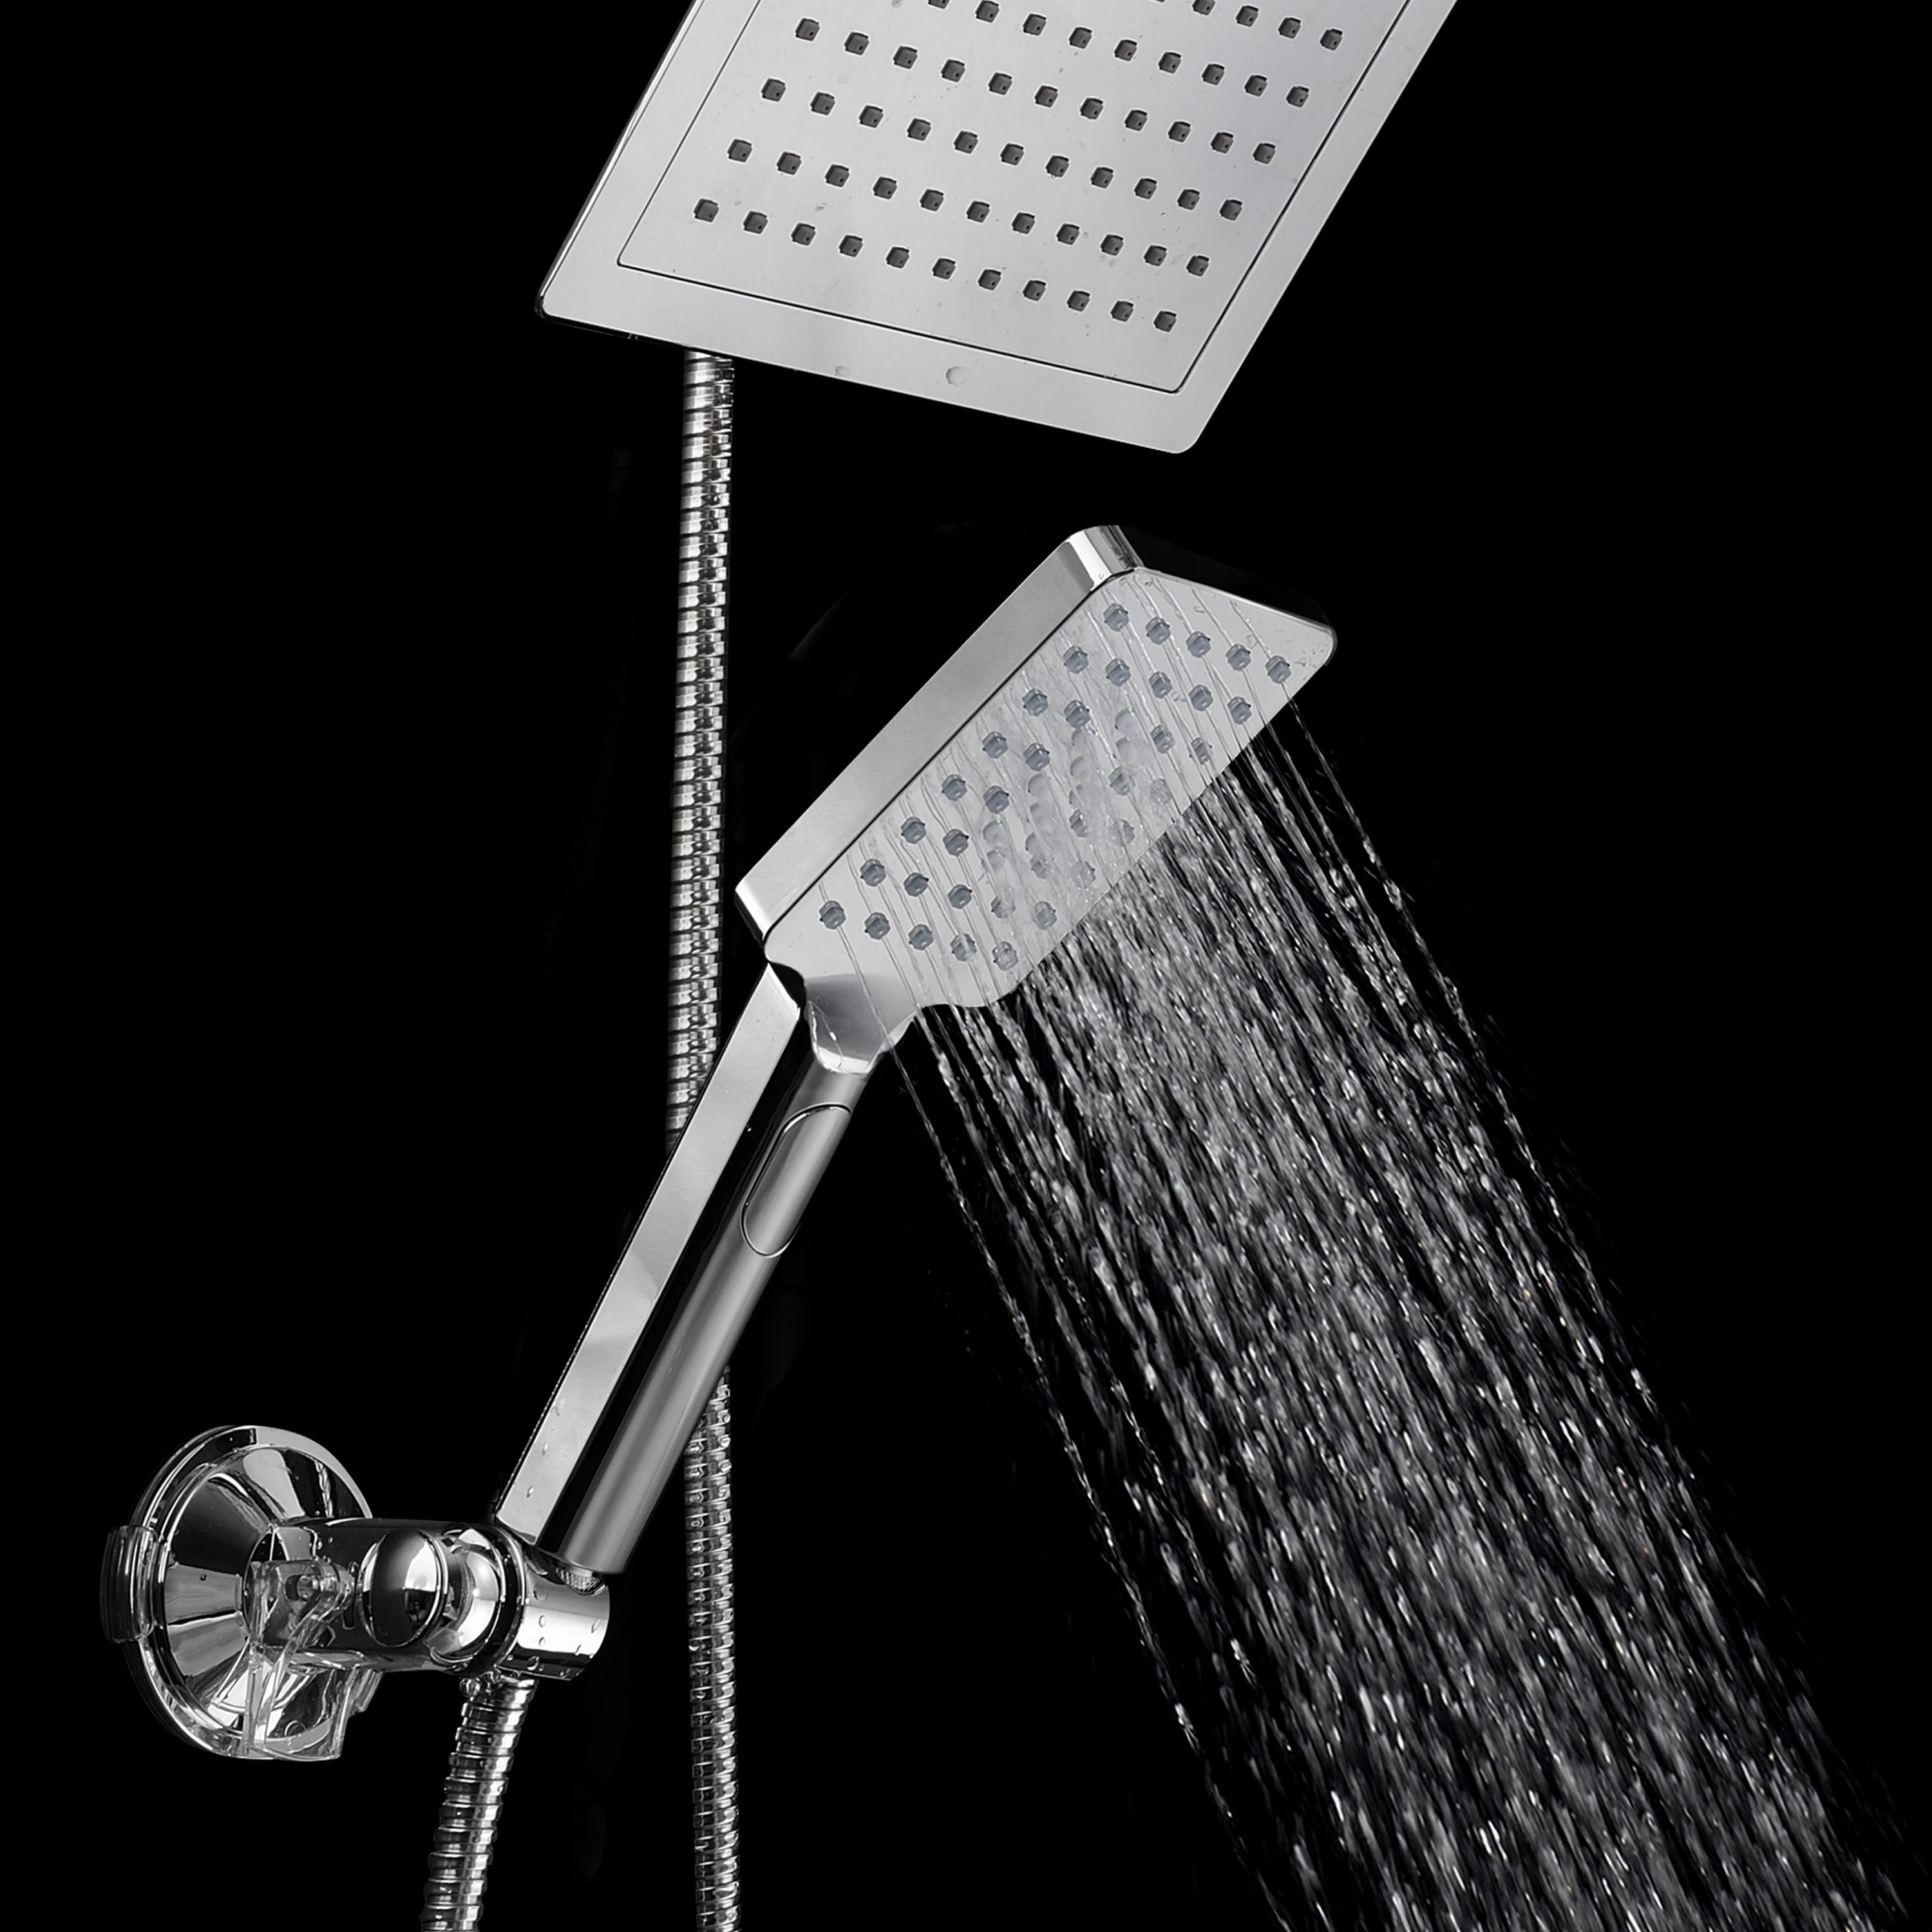 DreamSpa Ultra-Luxury 9-Inch Square Rainfall Combo with Push-Control Handheld Shower and Low-Reach Wall Bracket, Chrome - image 5 of 7